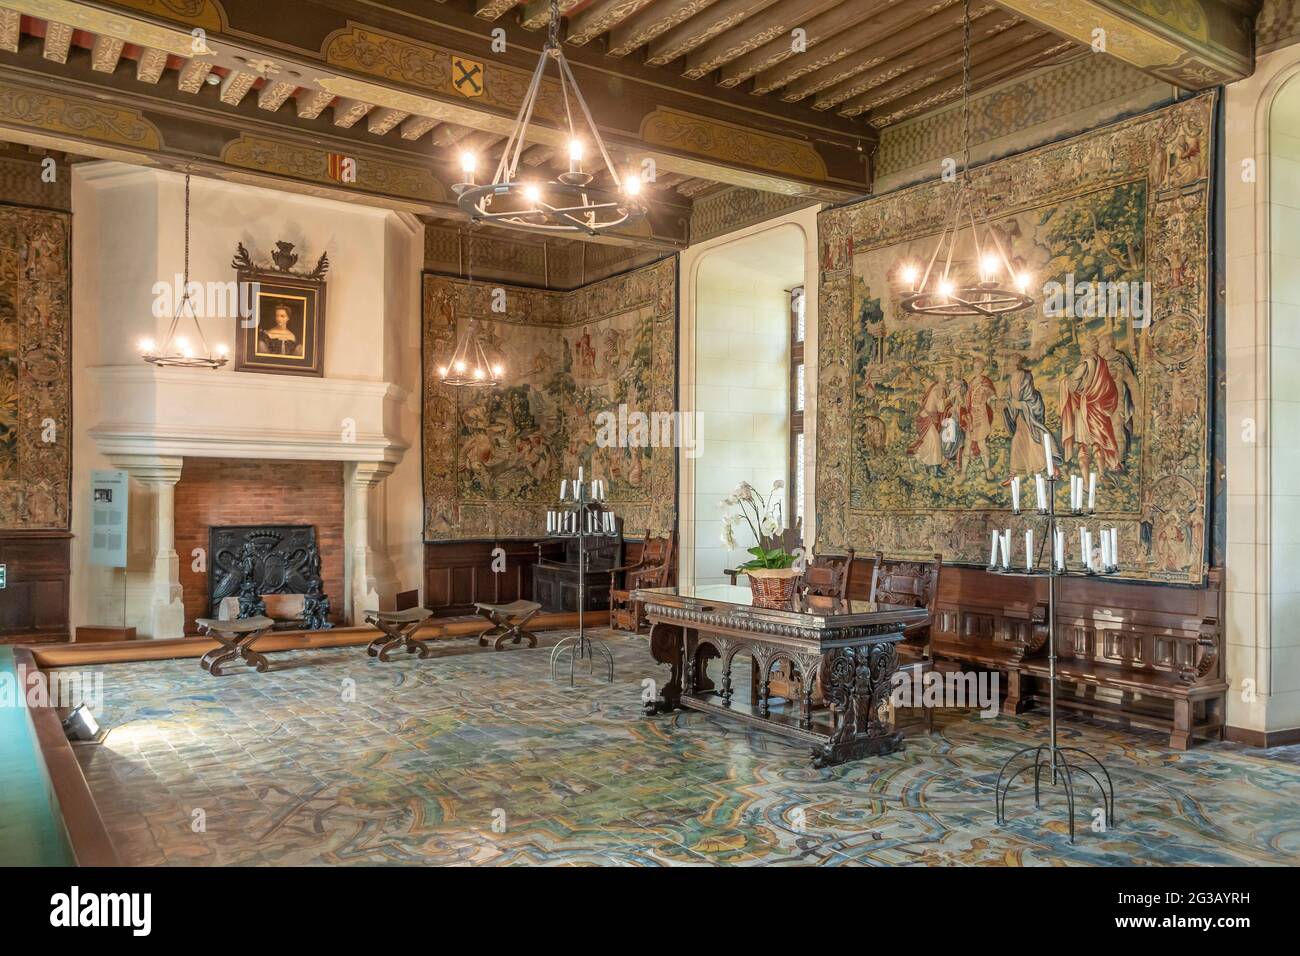 FRANCE - LOIRE VALLEY - LOIR ET CHER (41) - CASTLE OF CHAUMONT SUR LOIRE : THE COUNCIL ROOM, DECORATED WITH THE "HANGING OF THE PLANET AND DAYS". MADE Stock Photo